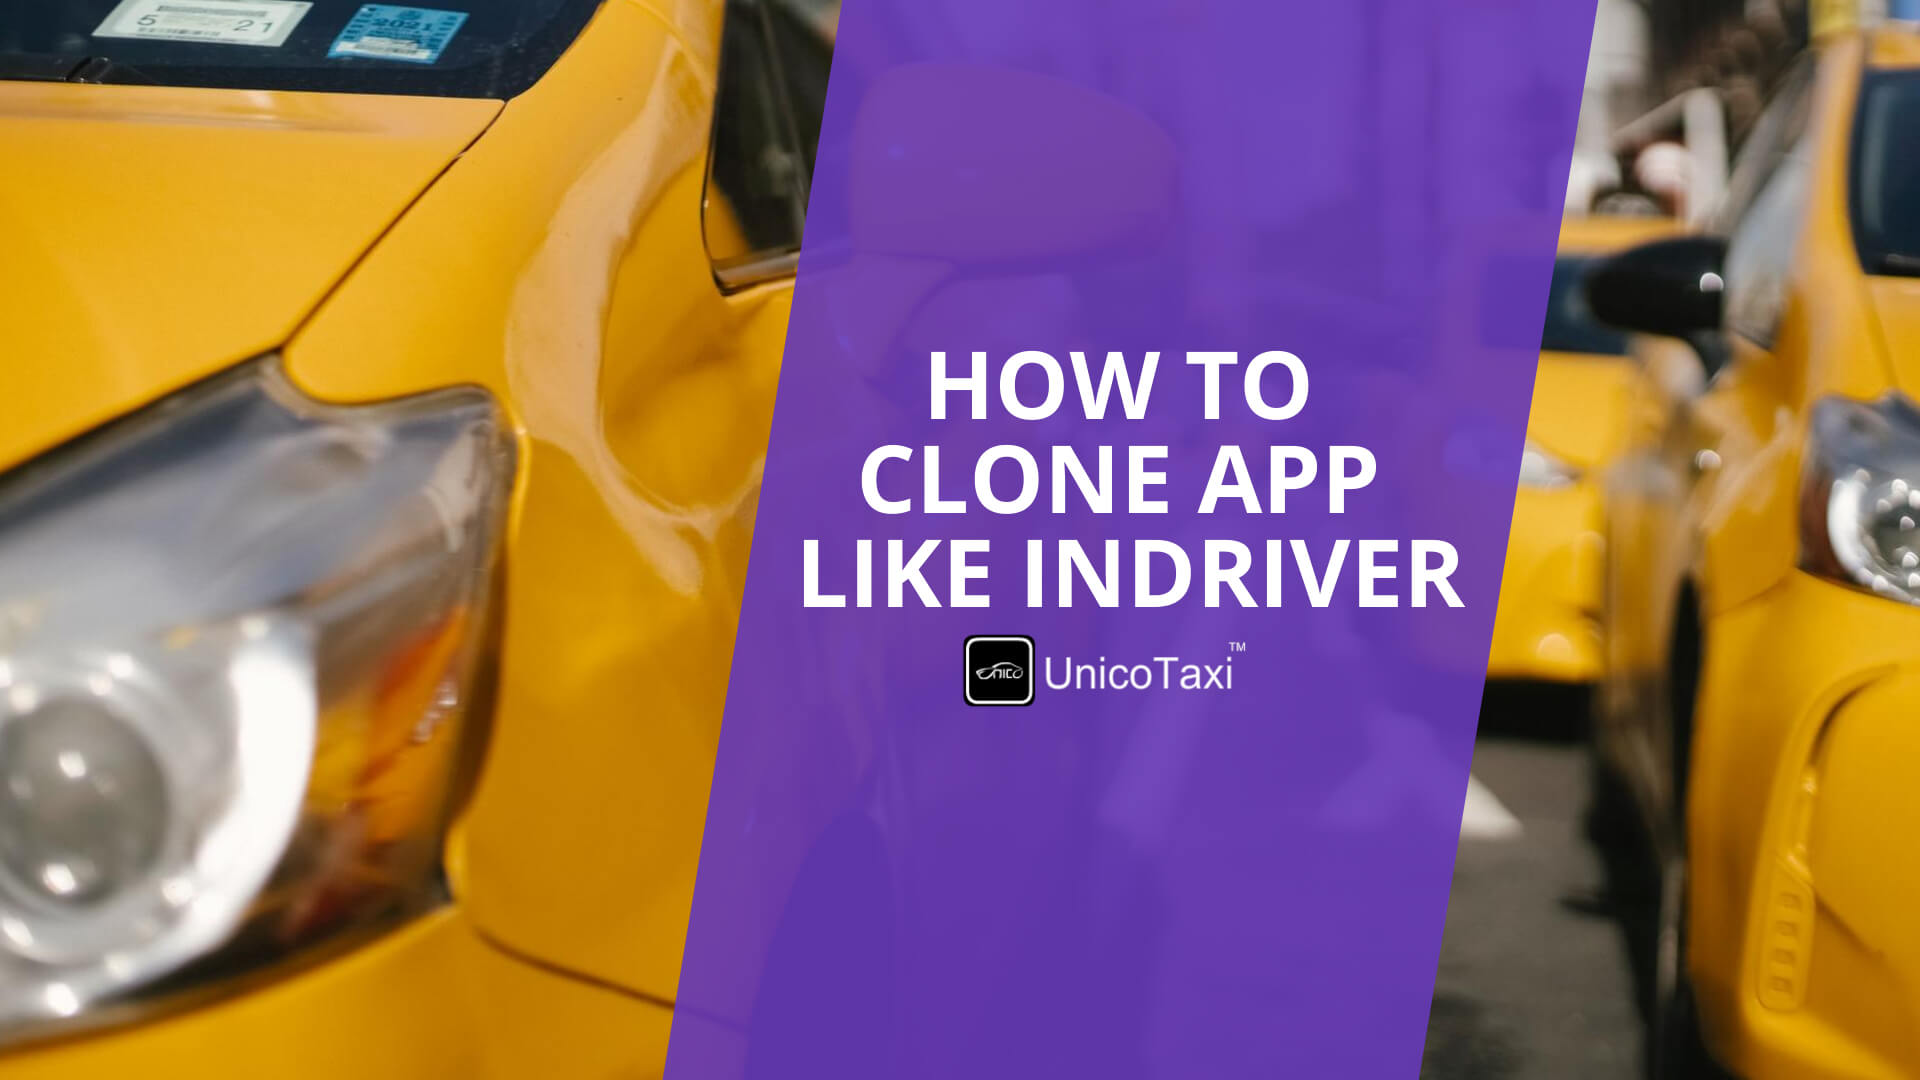 InDriverClone: How To Clone An App Like InDriver?